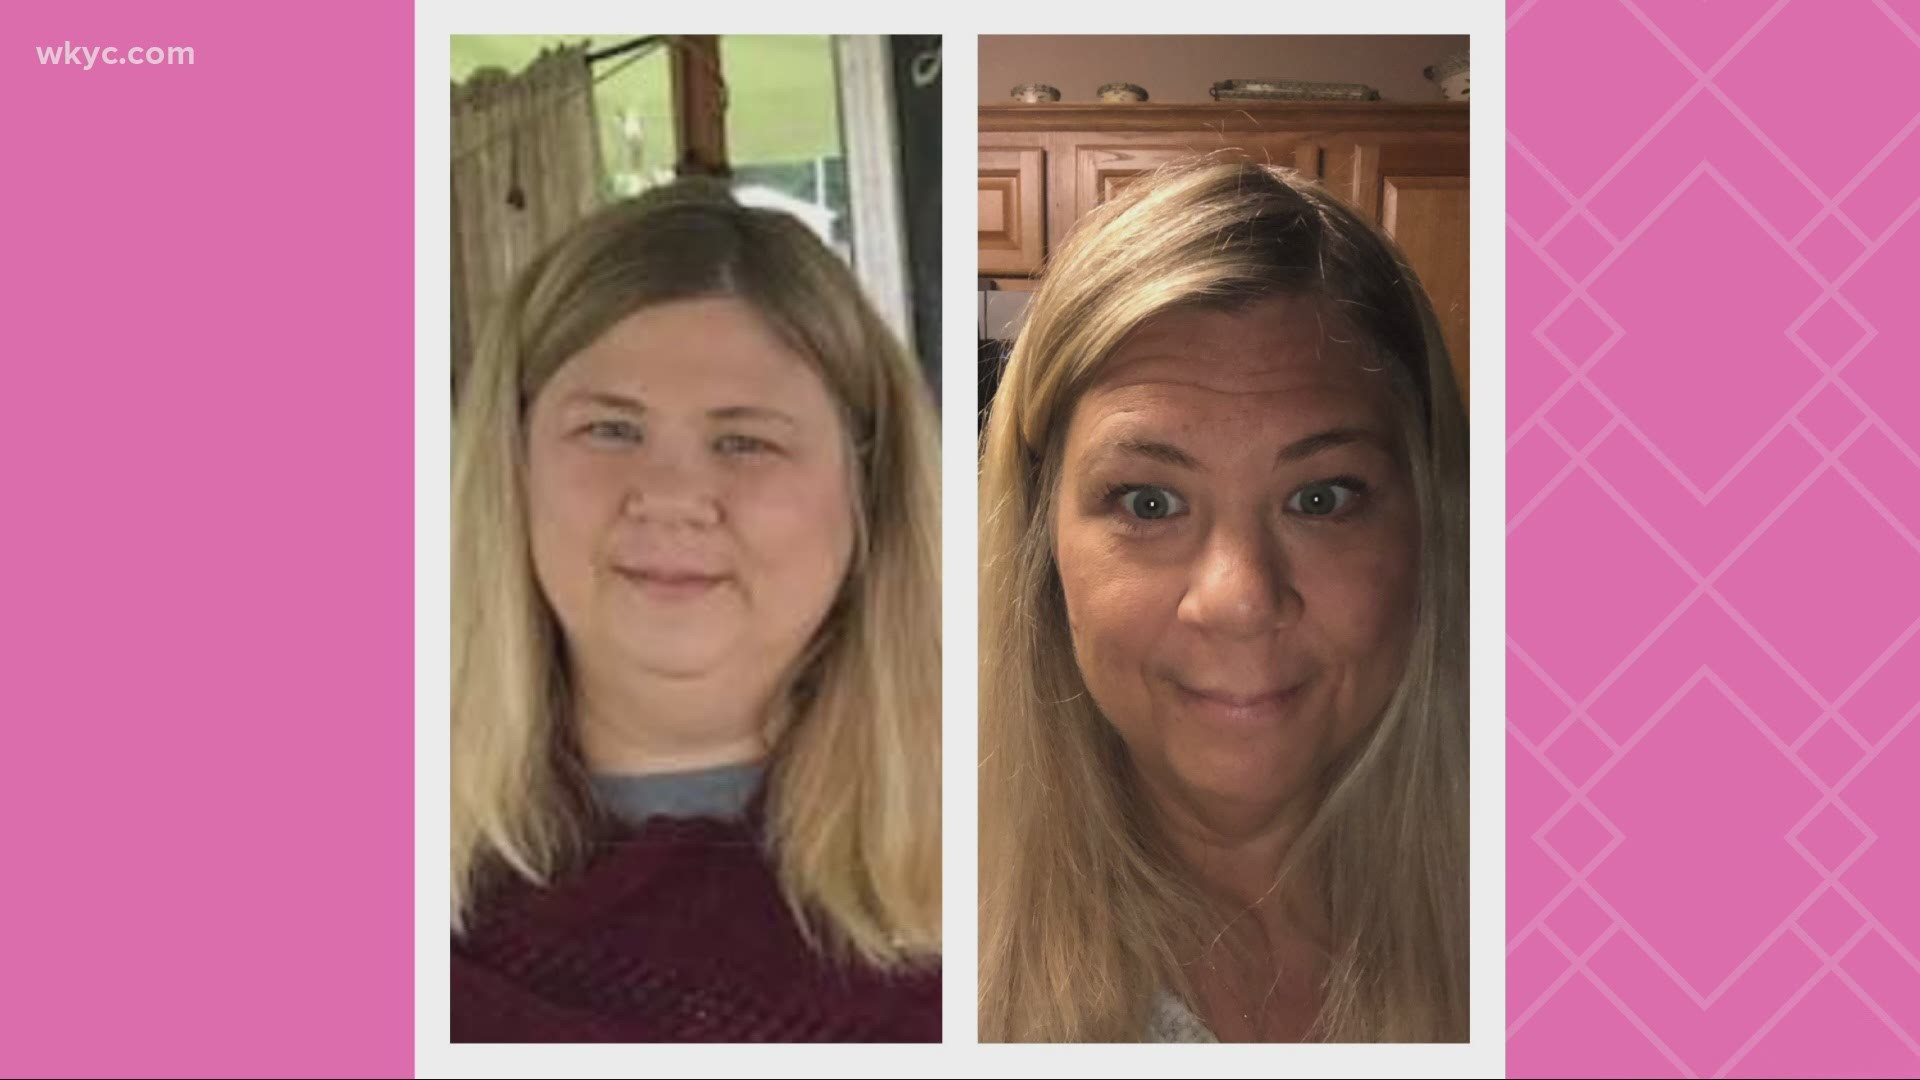 Shelly Tessean has a goal of losing 100 total pounds.